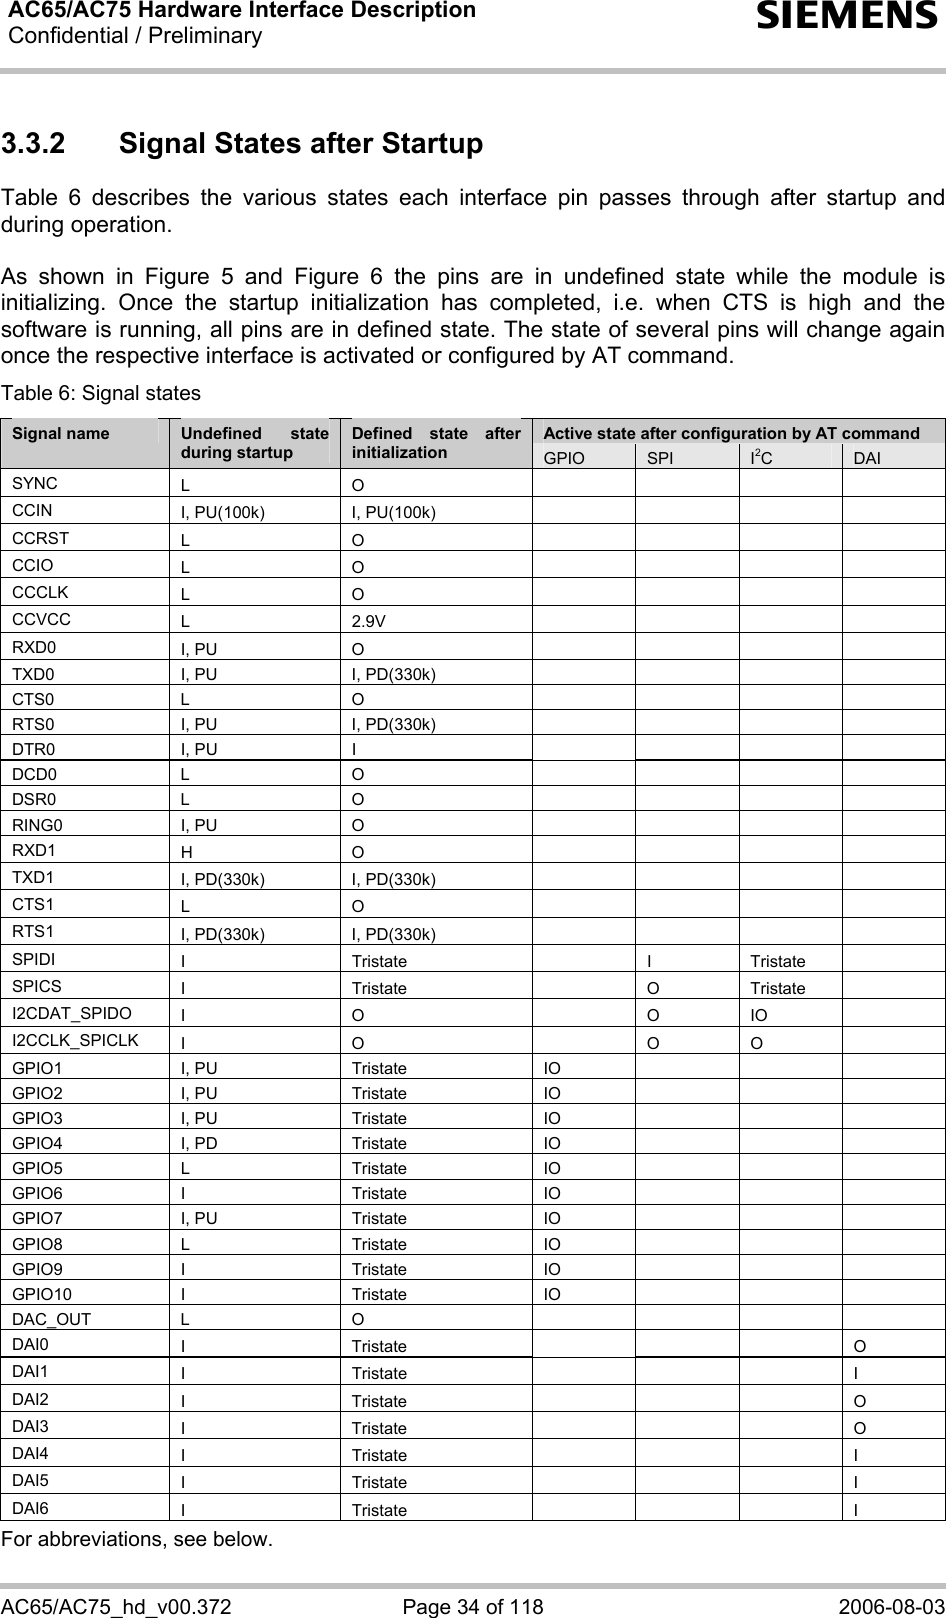 AC65/AC75 Hardware Interface Description Confidential / Preliminary  s AC65/AC75_hd_v00.372  Page 34 of 118  2006-08-03 3.3.2  Signal States after Startup Table 6 describes the various states each interface pin passes through after startup and during operation.   As shown in Figure 5 and Figure 6 the pins are in undefined state while the module is initializing. Once the startup initialization has completed, i.e. when CTS is high and the software is running, all pins are in defined state. The state of several pins will change again once the respective interface is activated or configured by AT command. Table 6: Signal states Active state after configuration by AT command Signal name  Undefined state during startup Defined state after initialization  GPIO  SPI  I2C  DAI SYNC   L  O      CCIN  I, PU(100k)  I, PU(100k)         CCRST  L  O      CCIO  L  O      CCCLK  L  O      CCVCC  L  2.9V      RXD0  I, PU  O      TXD0  I, PU  I, PD(330k)         CTS0  L  O      RTS0  I, PU  I, PD(330k)         DTR0  I, PU  I      DCD0  L  O      DSR0  L  O      RING0  I, PU  O      RXD1  H  O      TXD1  I, PD(330k)  I, PD(330k)         CTS1  L  O      RTS1  I, PD(330k)  I, PD(330k)         SPIDI  I Tristate  I Tristate  SPICS  I Tristate  O Tristate  I2CDAT_SPIDO  I O   O IO  I2CCLK_SPICLK  I O   O O  GPIO1 I, PU  Tristate  IO    GPIO2 I, PU  Tristate  IO    GPIO3 I, PU  Tristate  IO    GPIO4 I, PD  Tristate  IO    GPIO5 L  Tristate  IO    GPIO6 I  Tristate  IO    GPIO7 I, PU  Tristate  IO    GPIO8 L  Tristate  IO    GPIO9 I  Tristate  IO    GPIO10 I  Tristate  IO    DAC_OUT L  O      DAI0  I  Tristate     O DAI1  I  Tristate     I DAI2  I  Tristate     O DAI3  I  Tristate     O DAI4  I  Tristate     I DAI5  I  Tristate     I DAI6  I  Tristate     I For abbreviations, see below. 